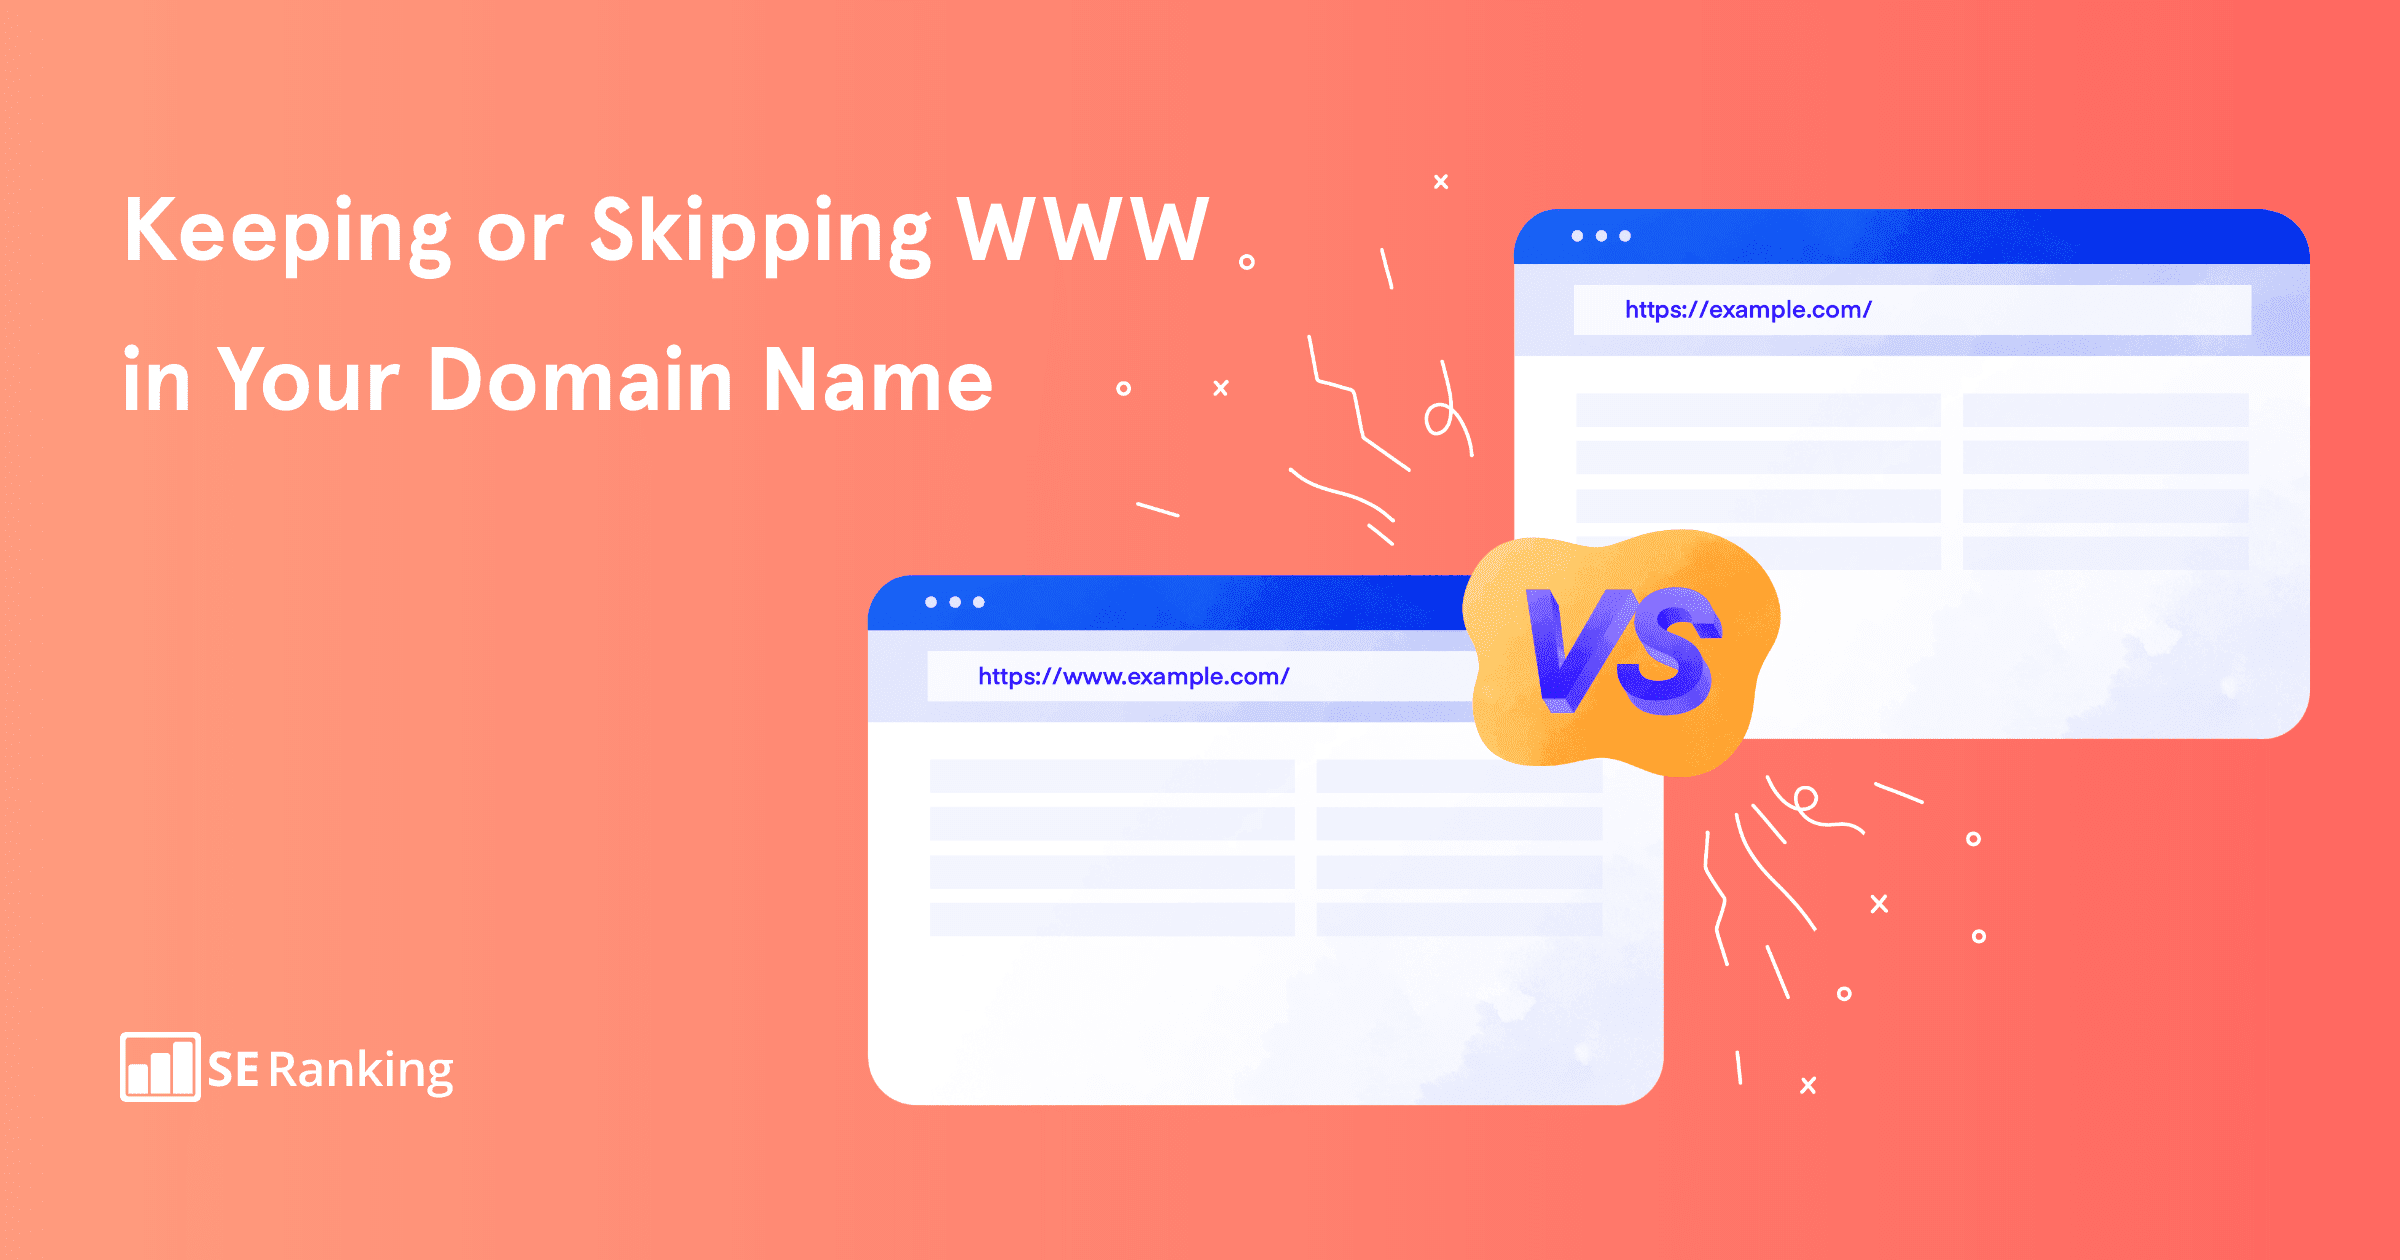 What are non-www domains?